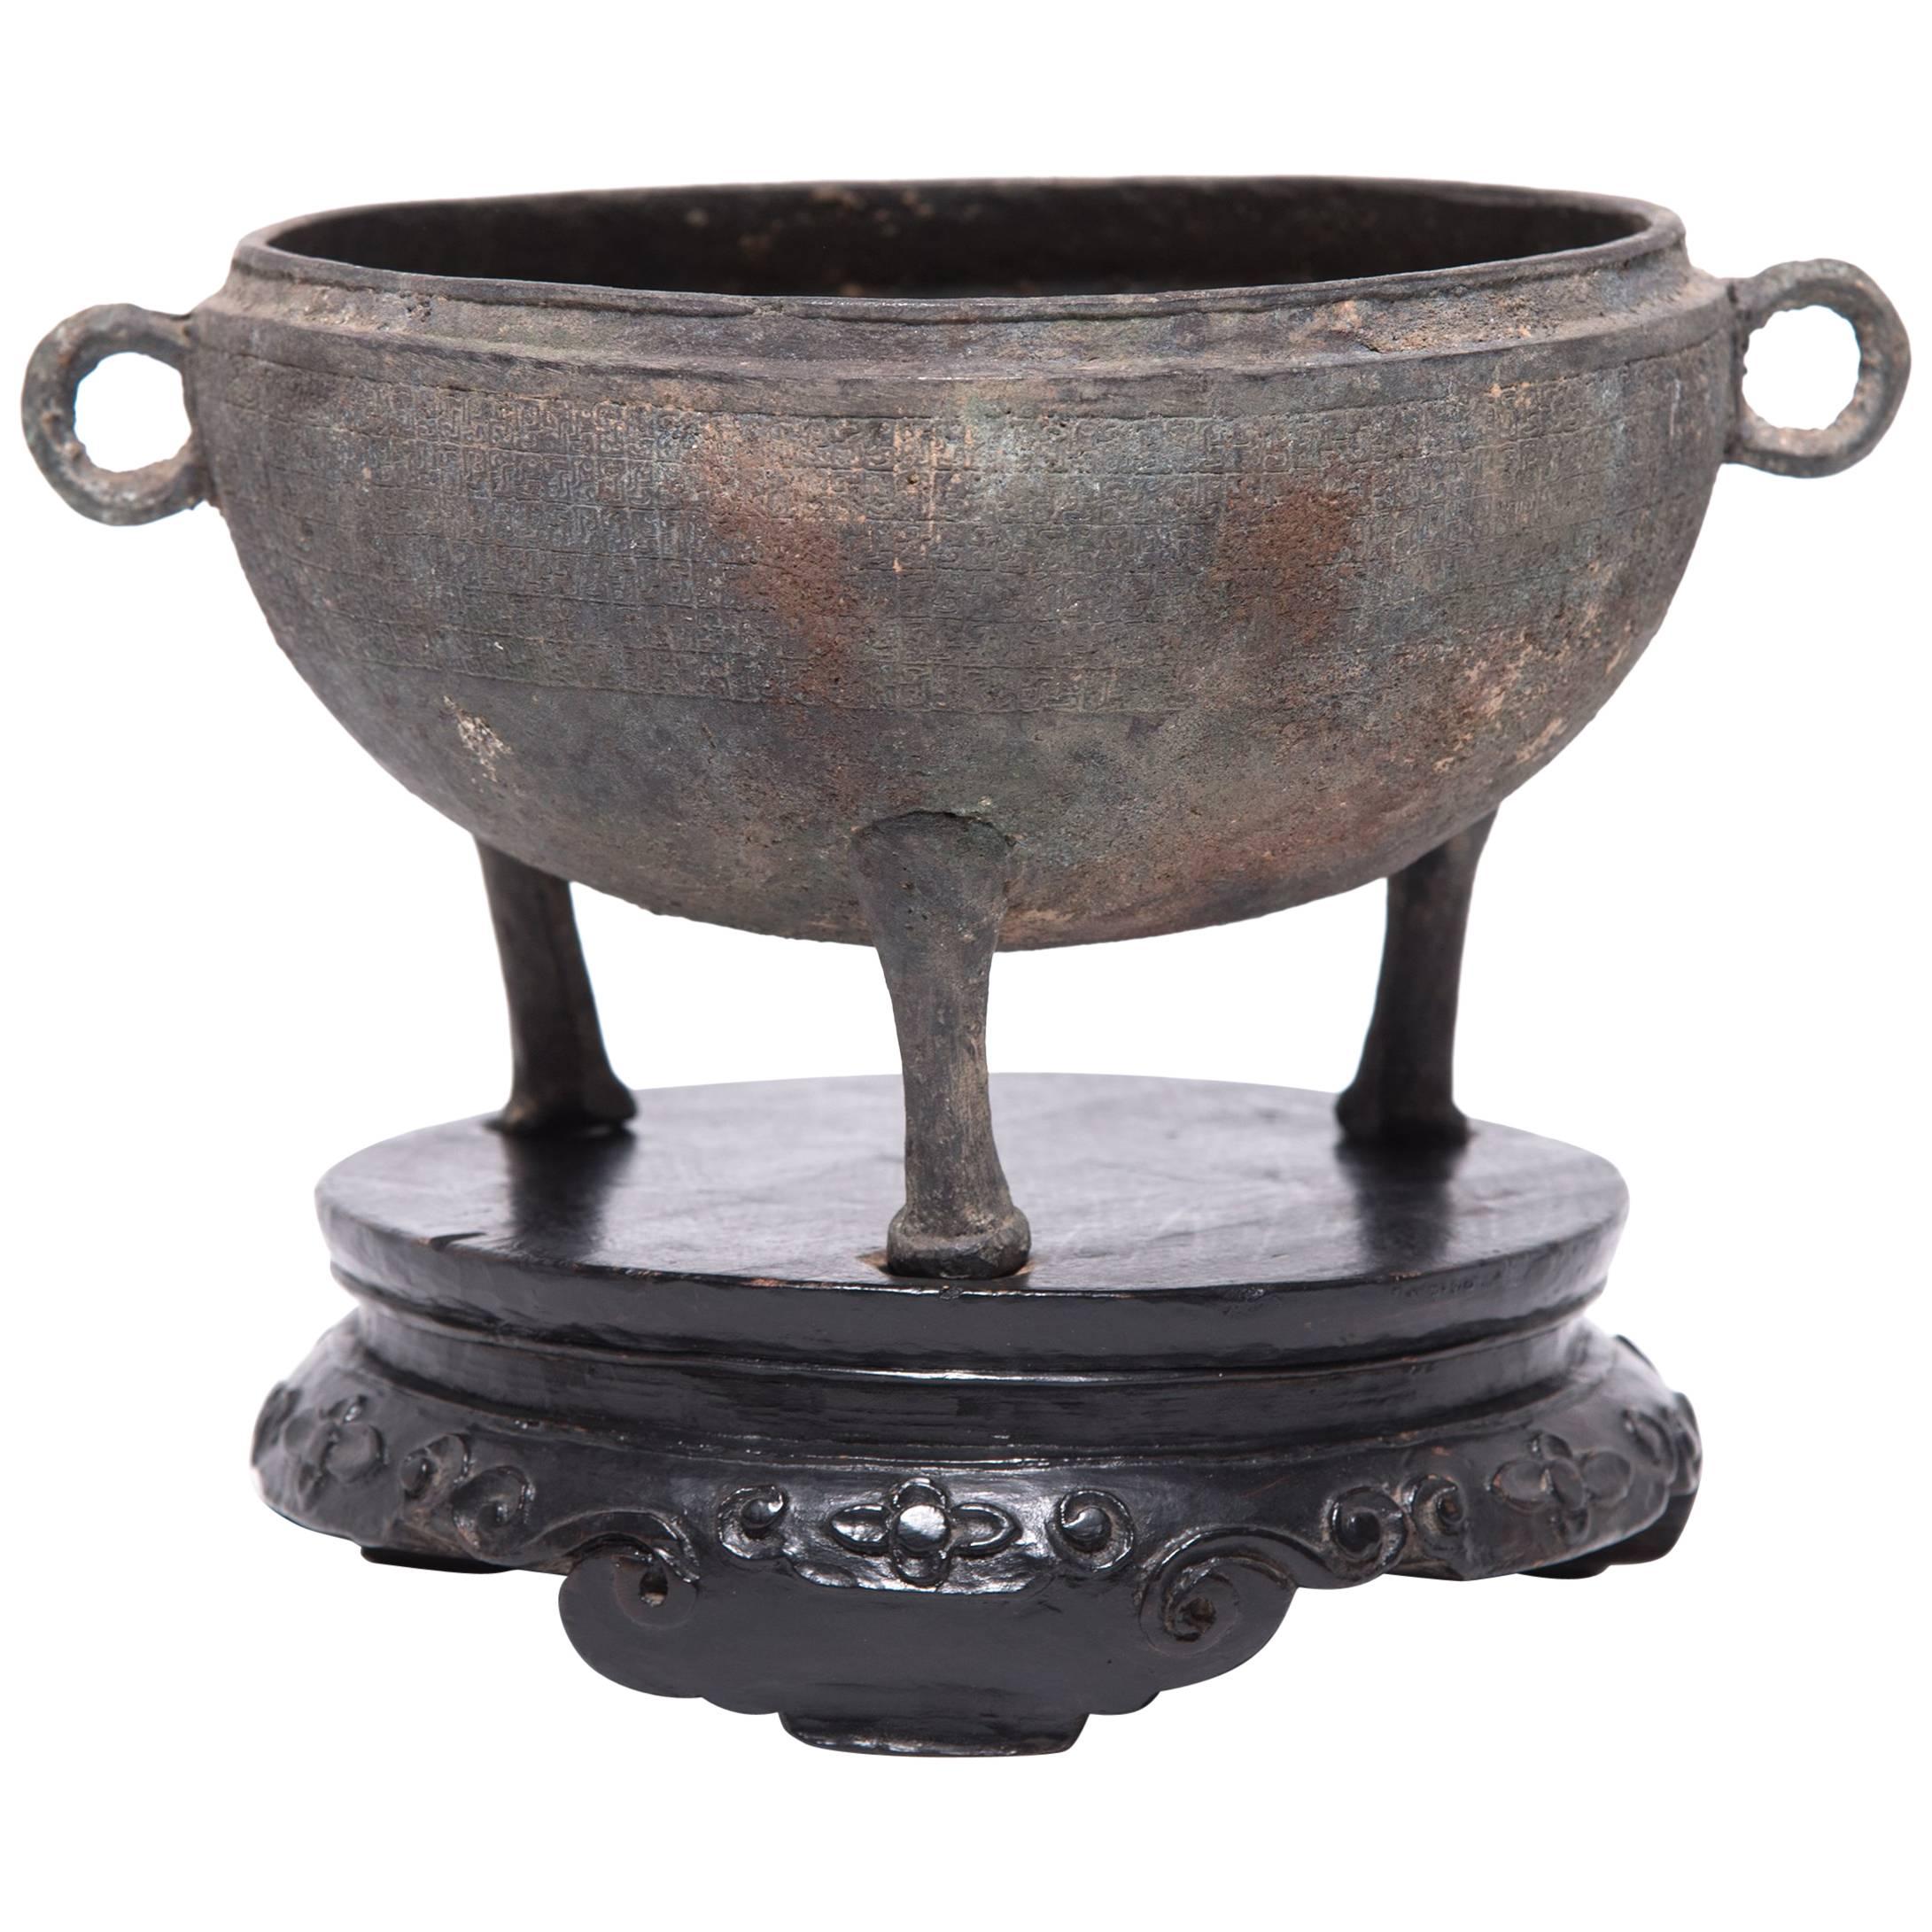 Chinese Bronze Vessel with Tripod Feet, c. 1750